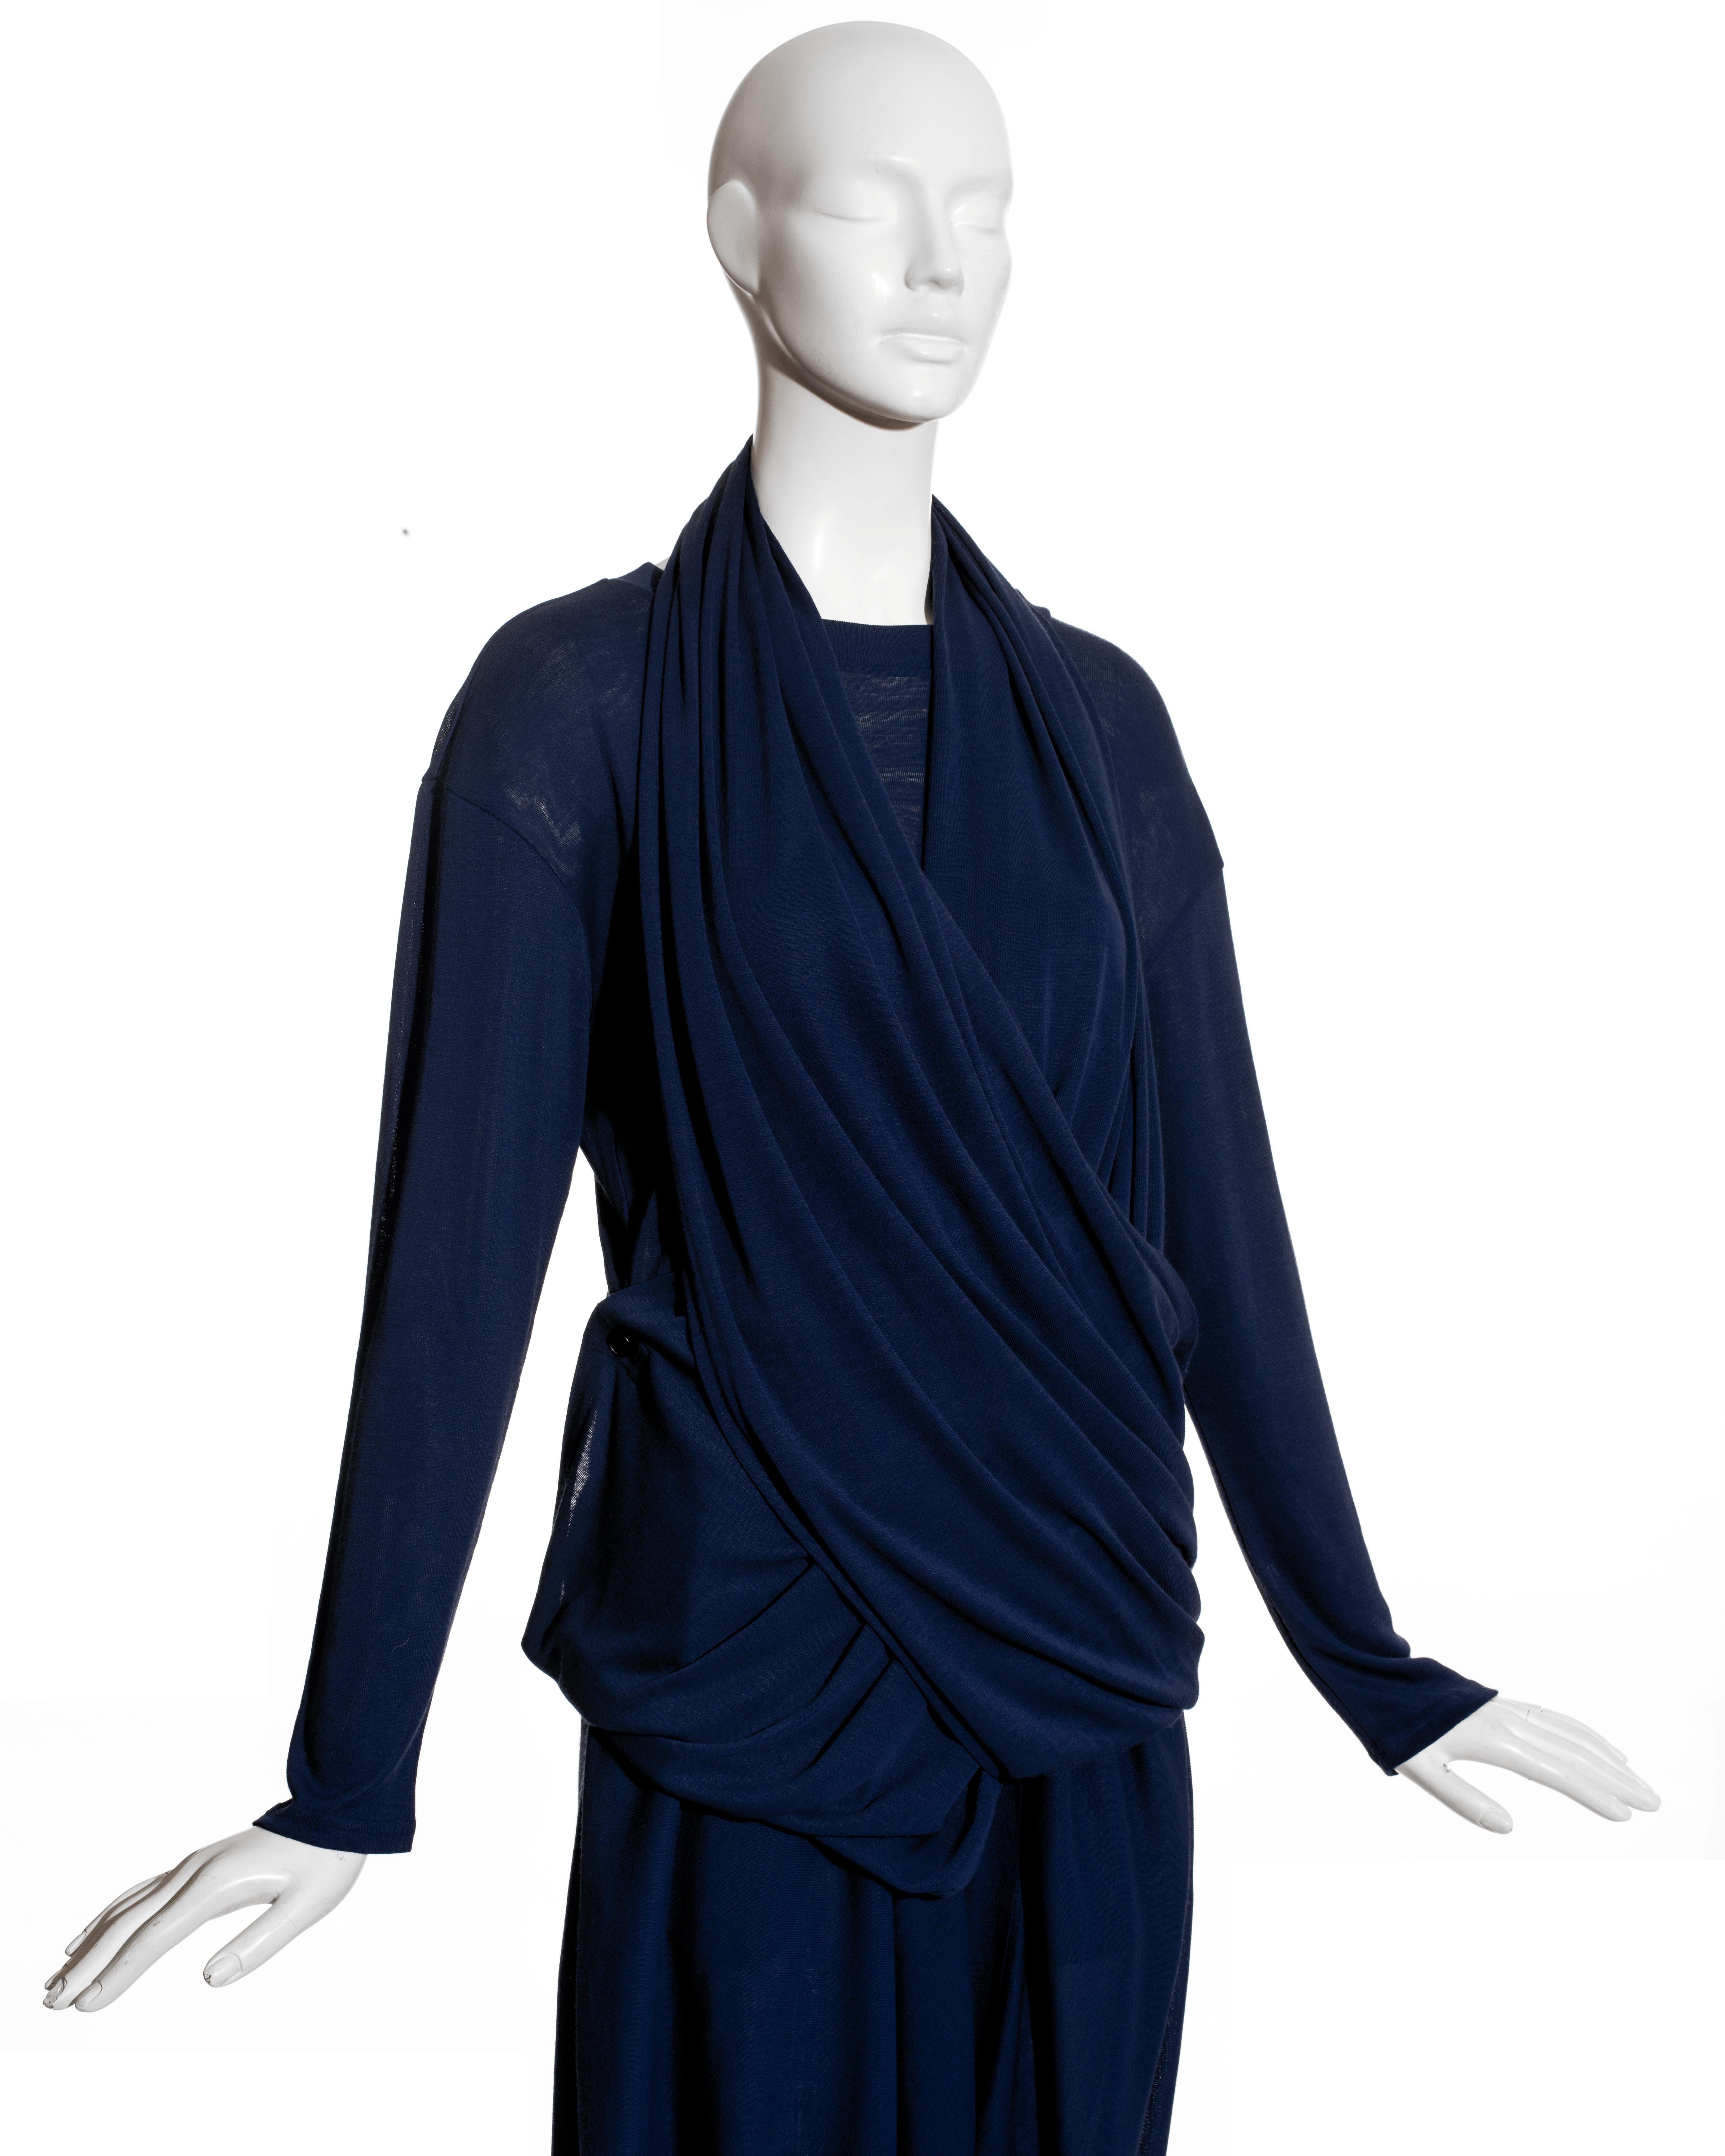 Black Issey Miyake blue rayon harem pant suit, c. 1985 For Sale